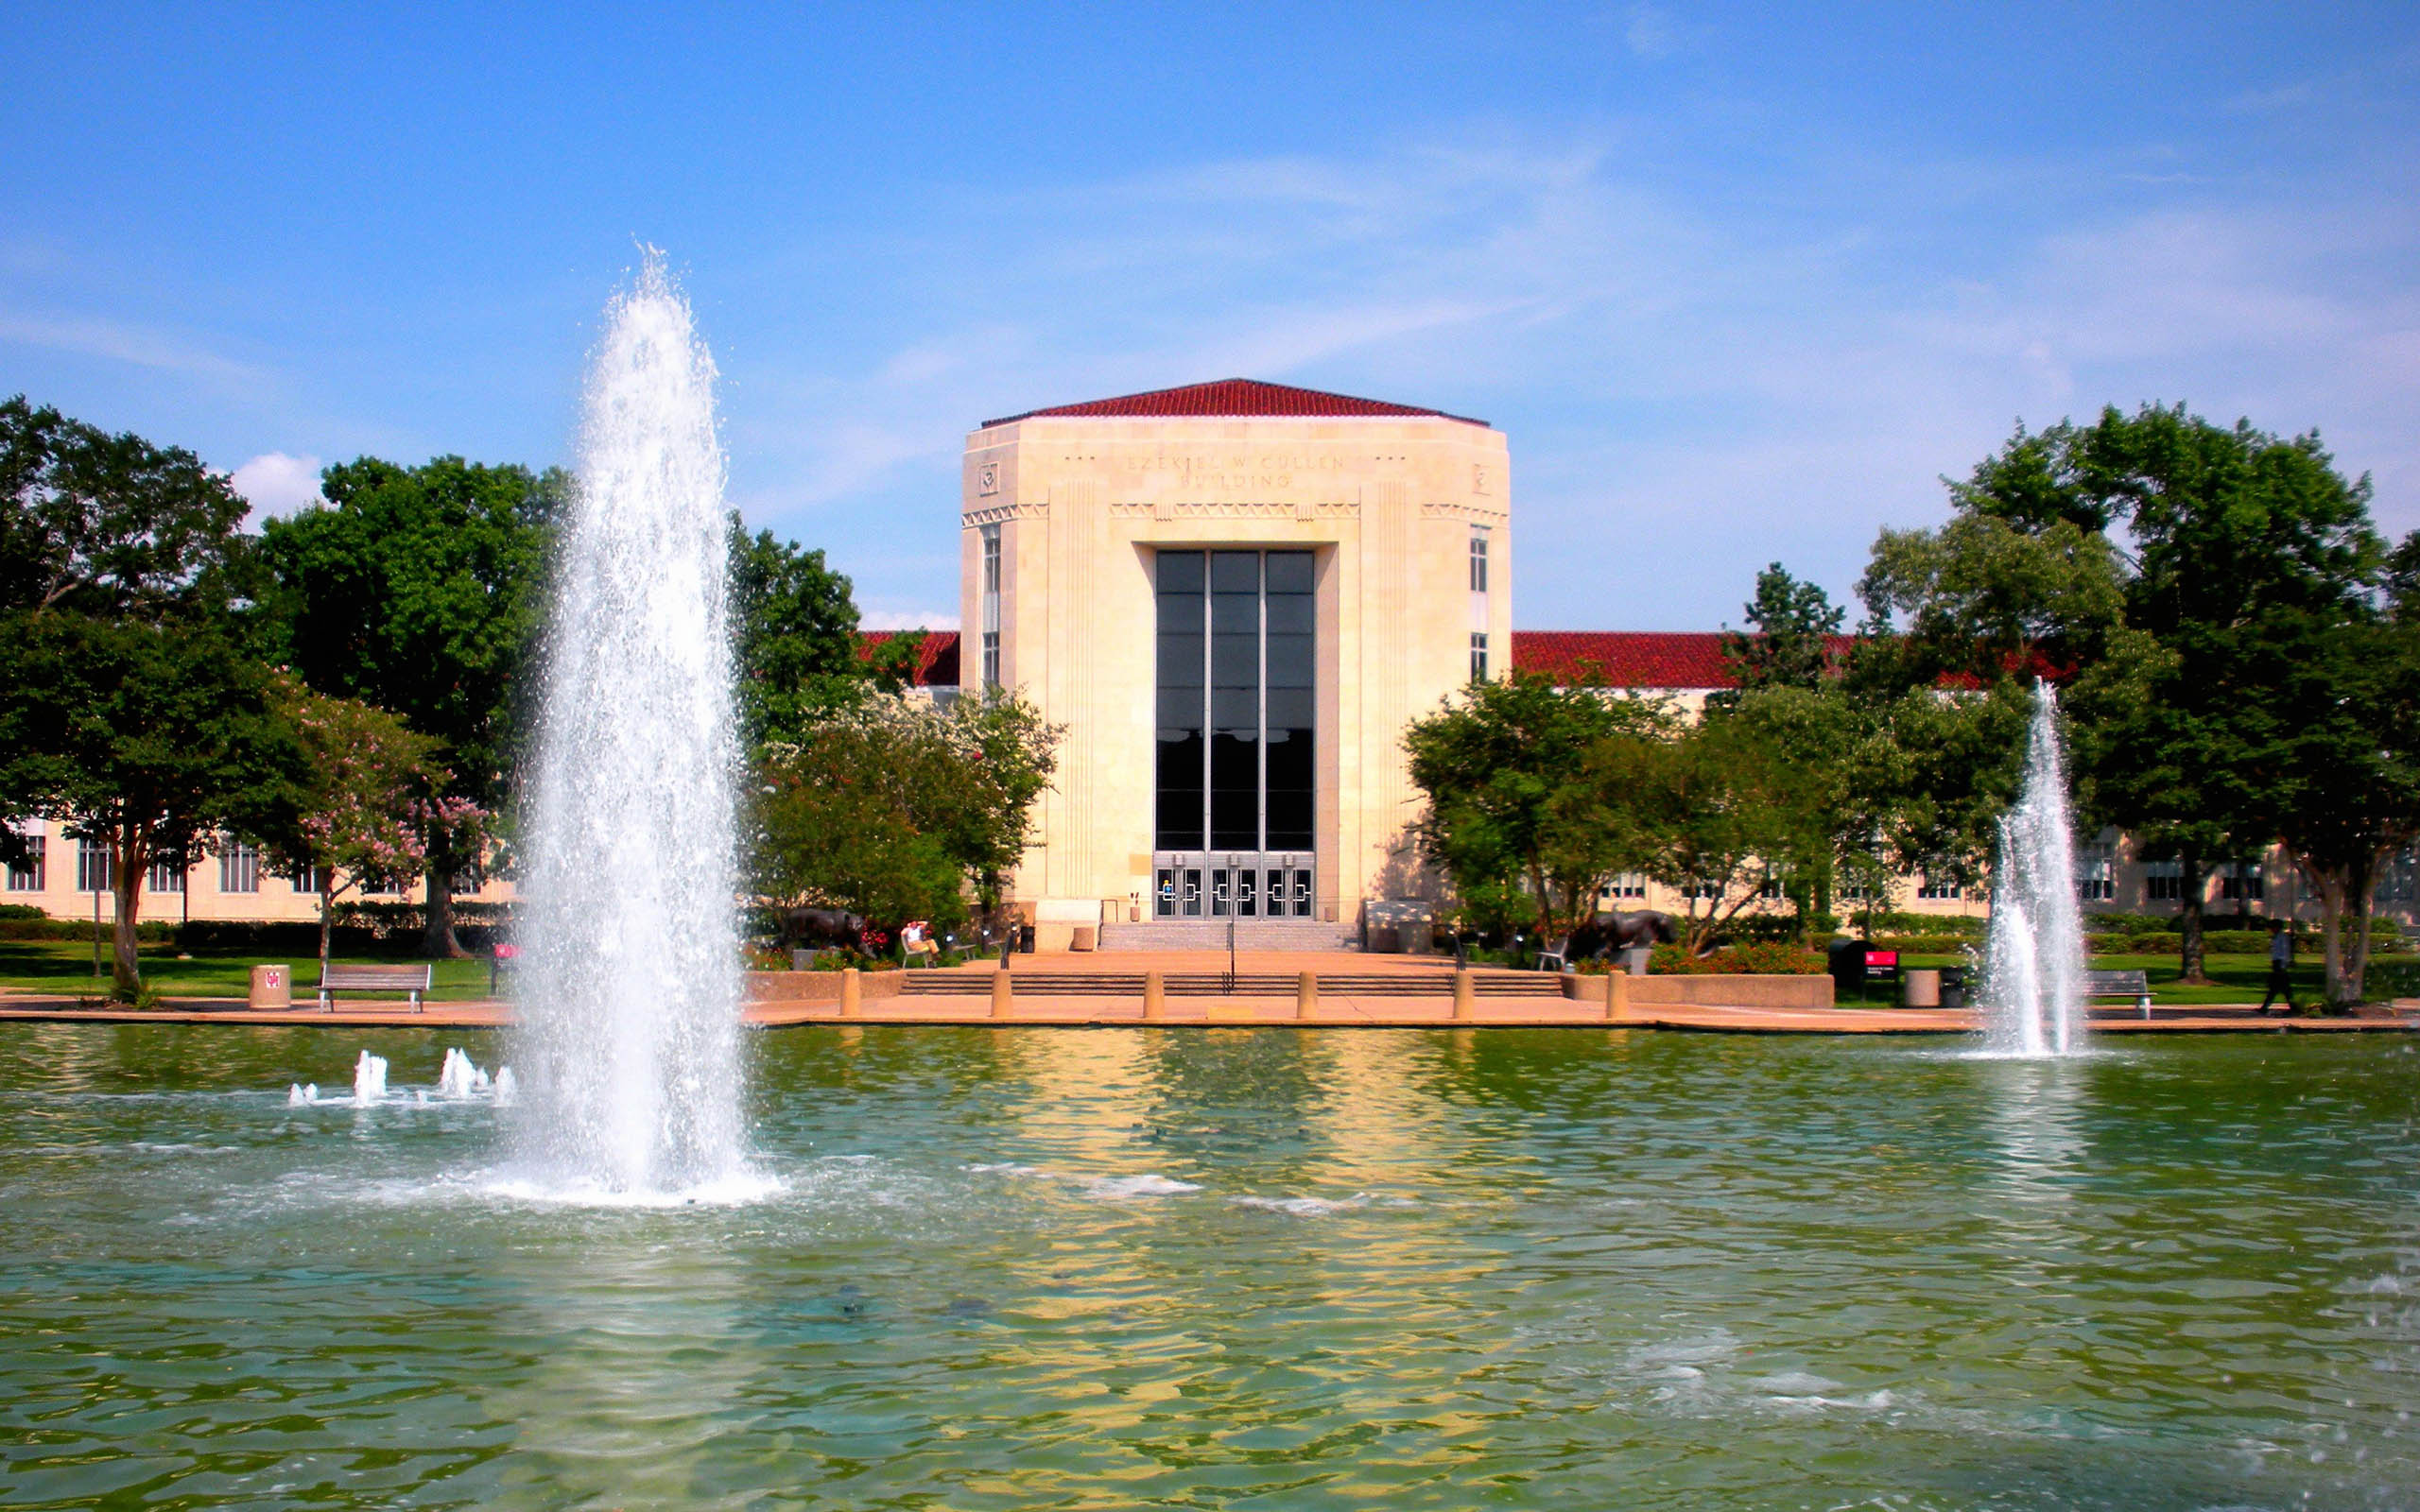 University of Houston Overview - Schools and Colleges by OwlGuru.com